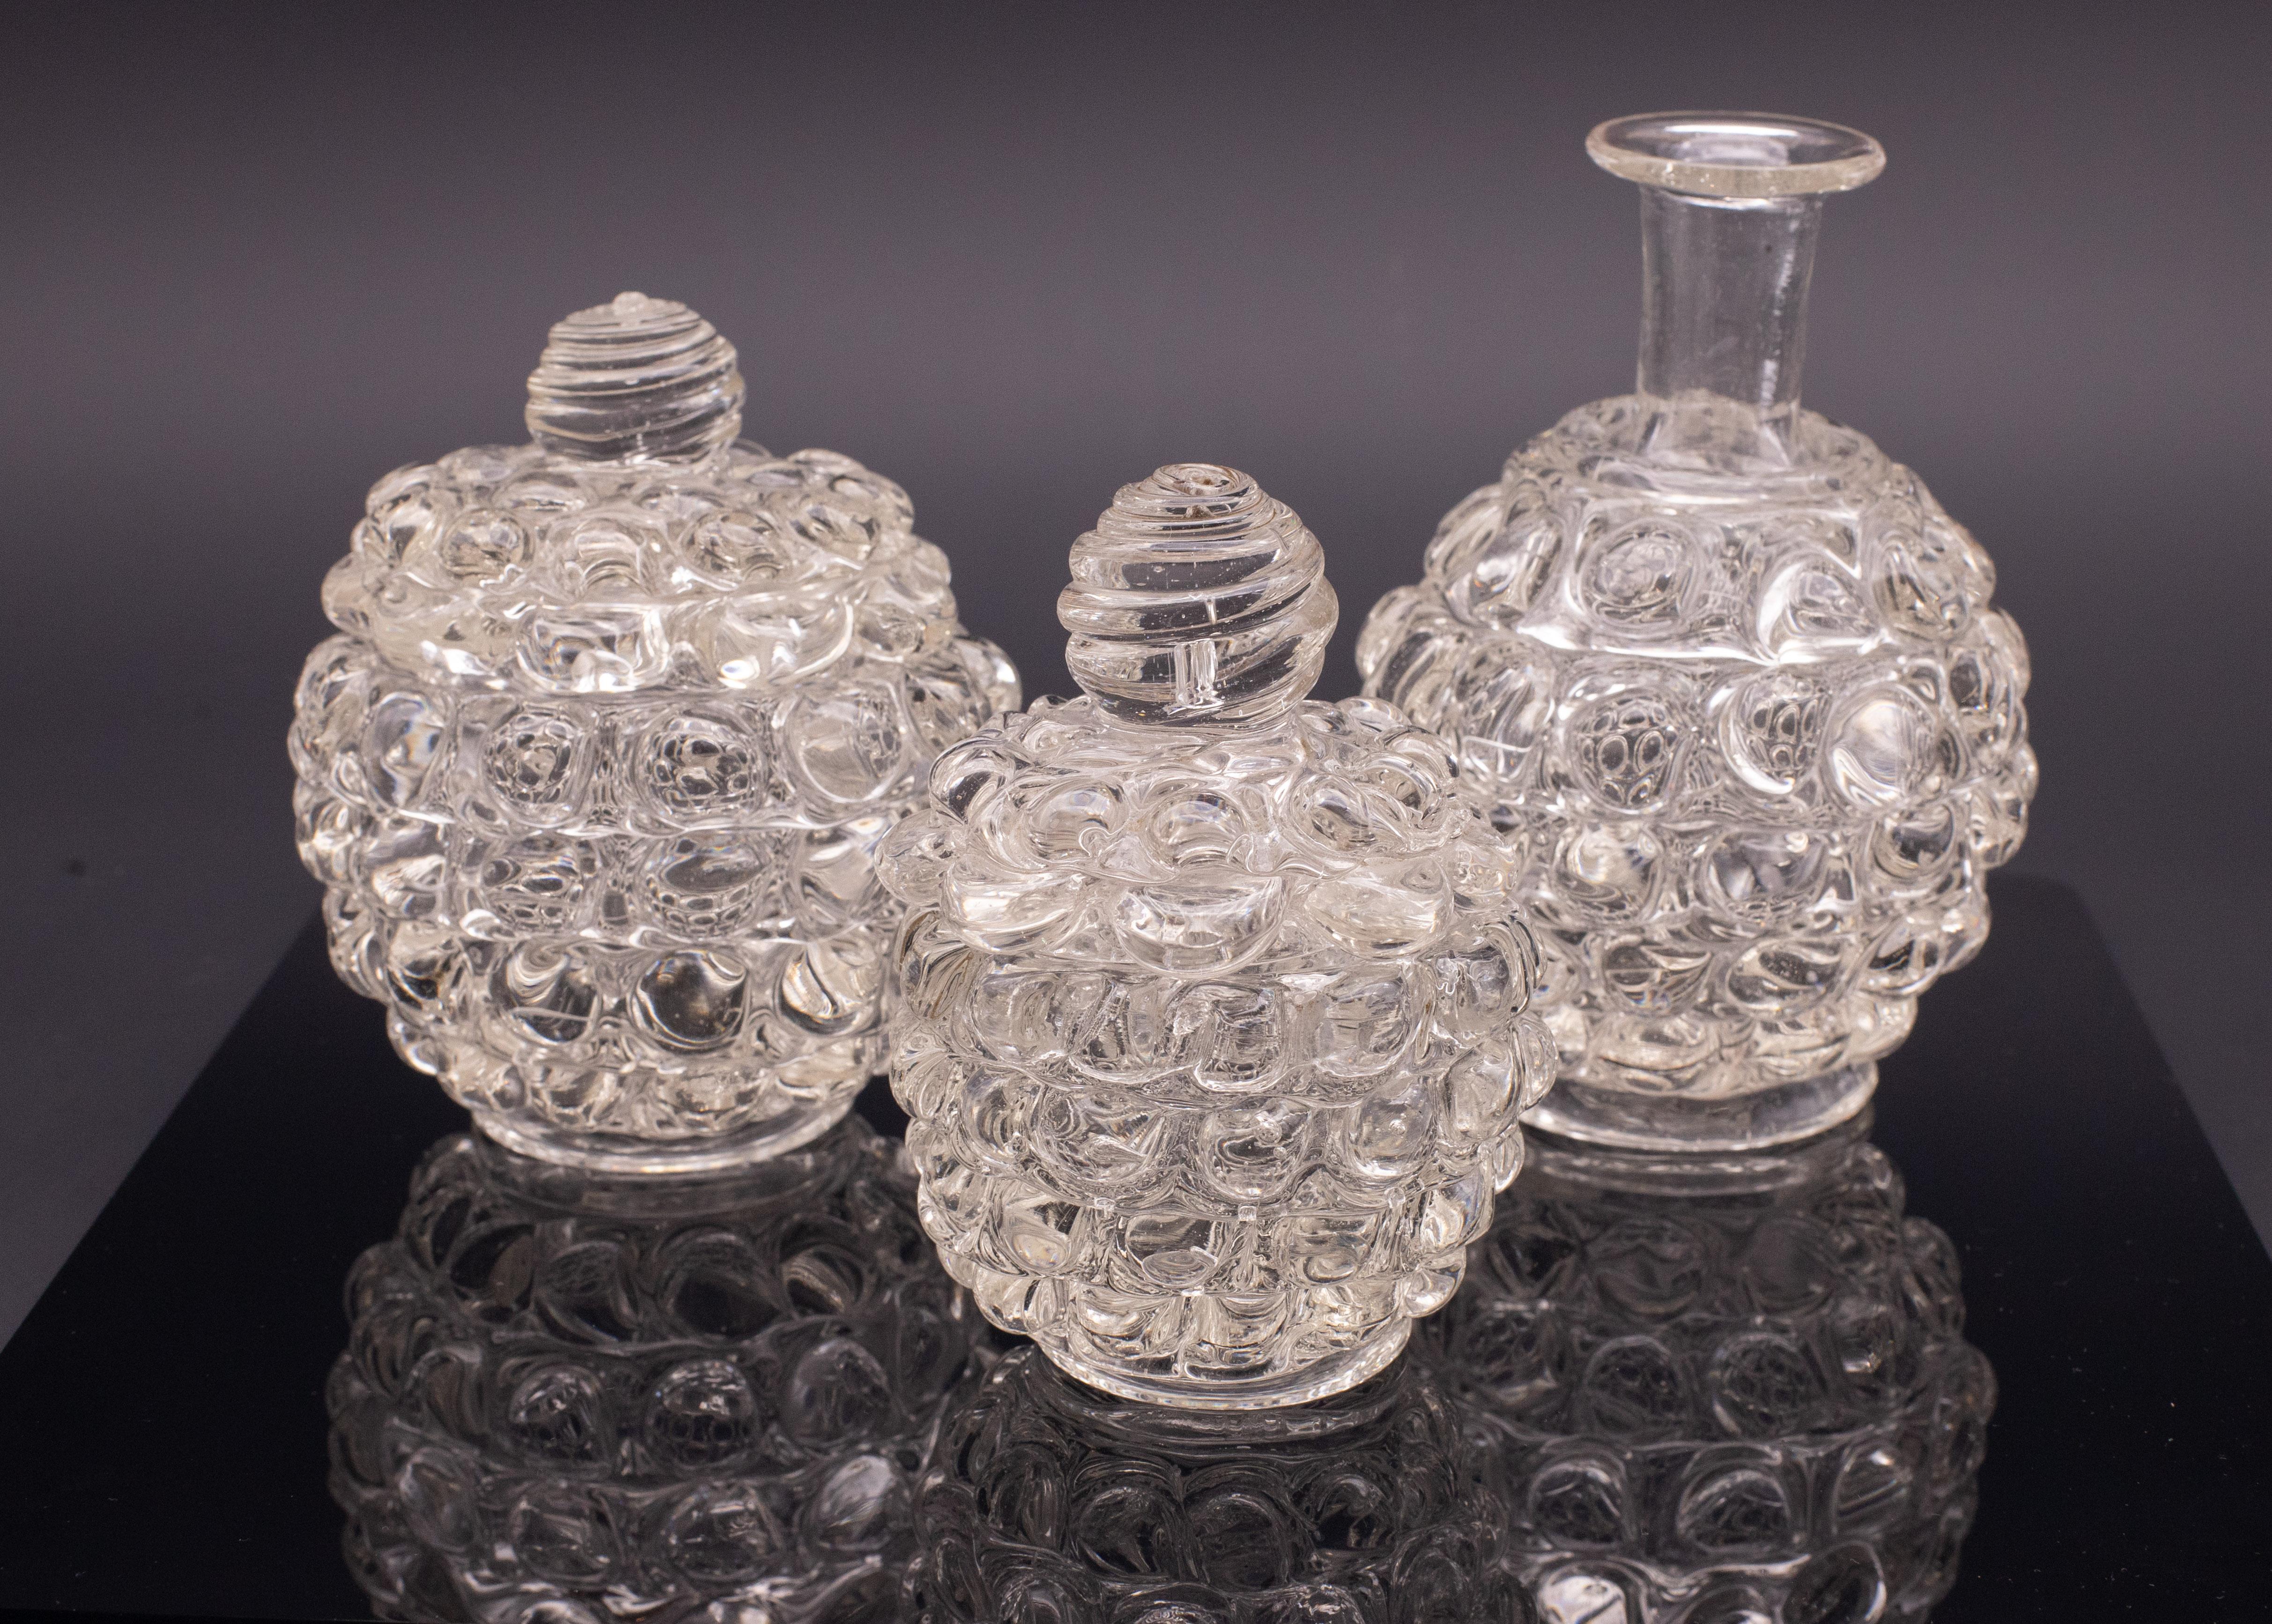 Set of 3 Series Lenti Vase Barovier & Toso Italy, Murano Glass, 1940s For Sale 8